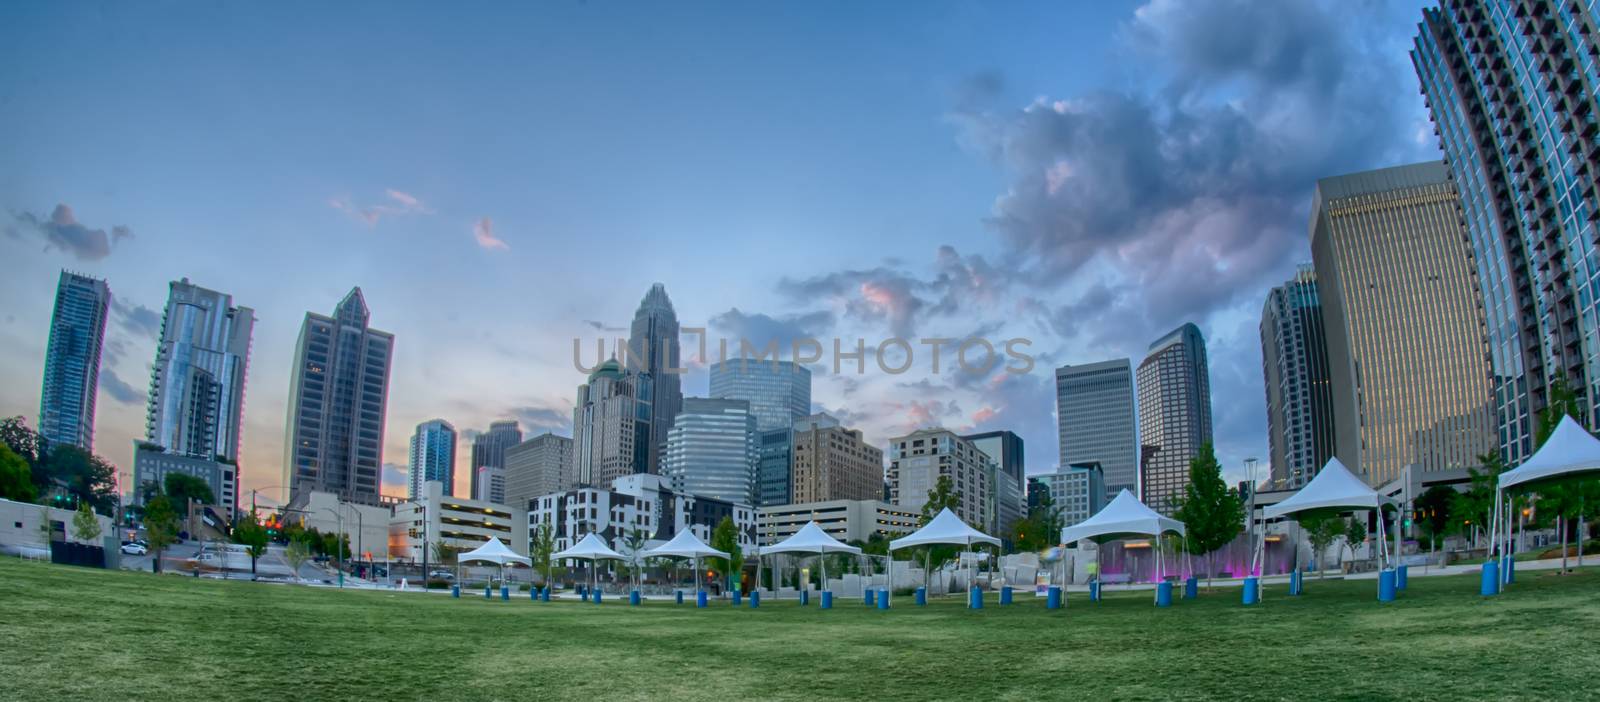 August 29, 2014, Charlotte, NC - view of Charlotte skyline at night near Romare Bearden park in the morning